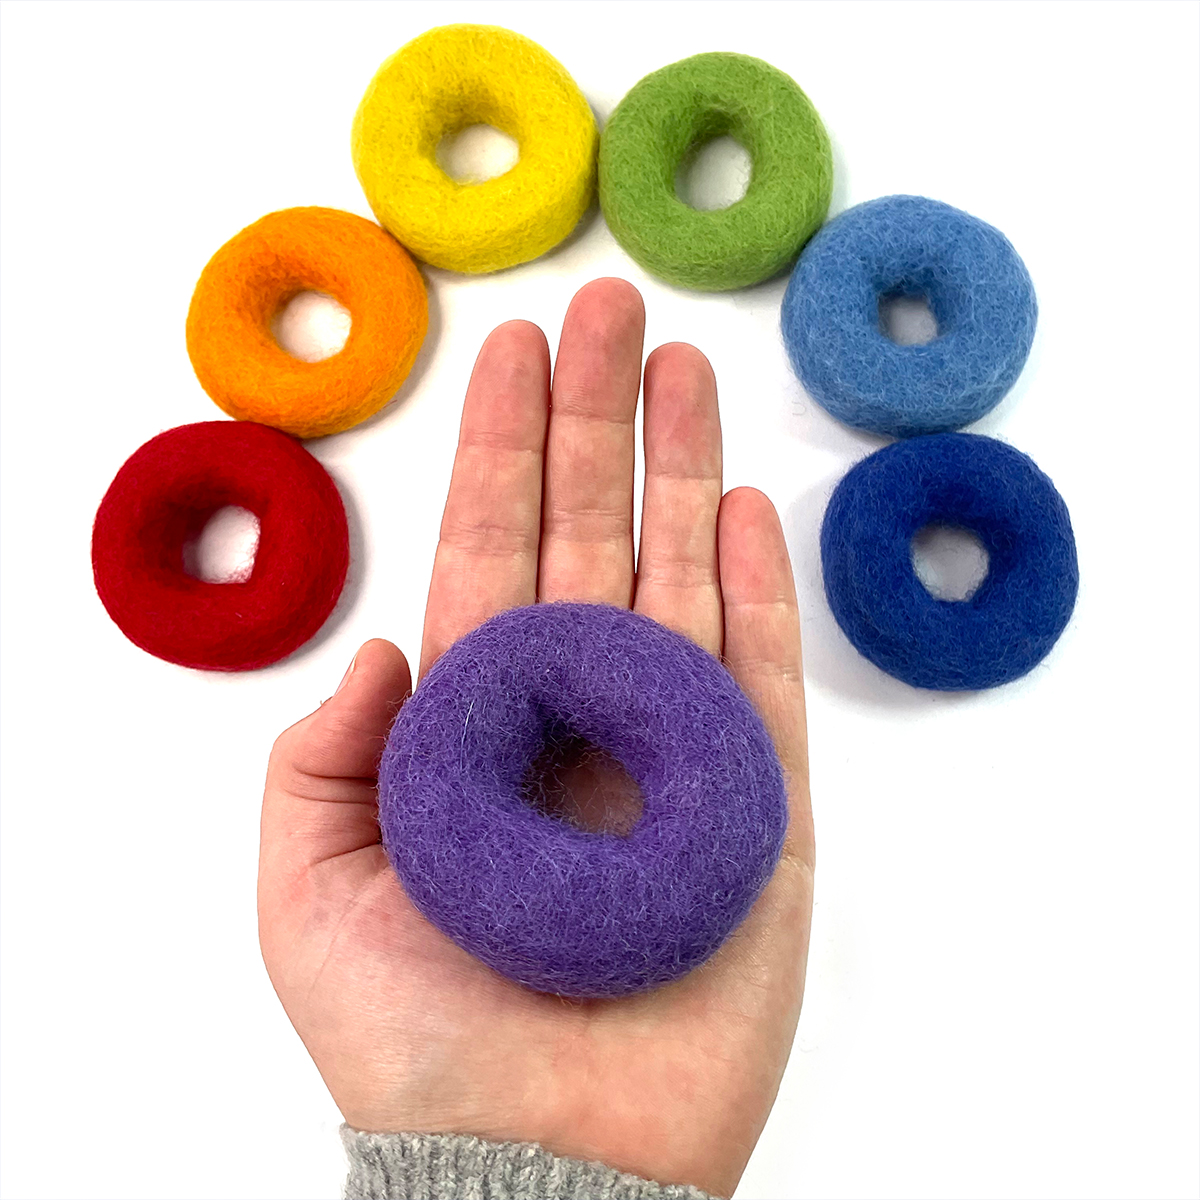 Papoose - Rainbow Felt Rings / Donuts 7pcs (7 colours) WHILE QTY LAST